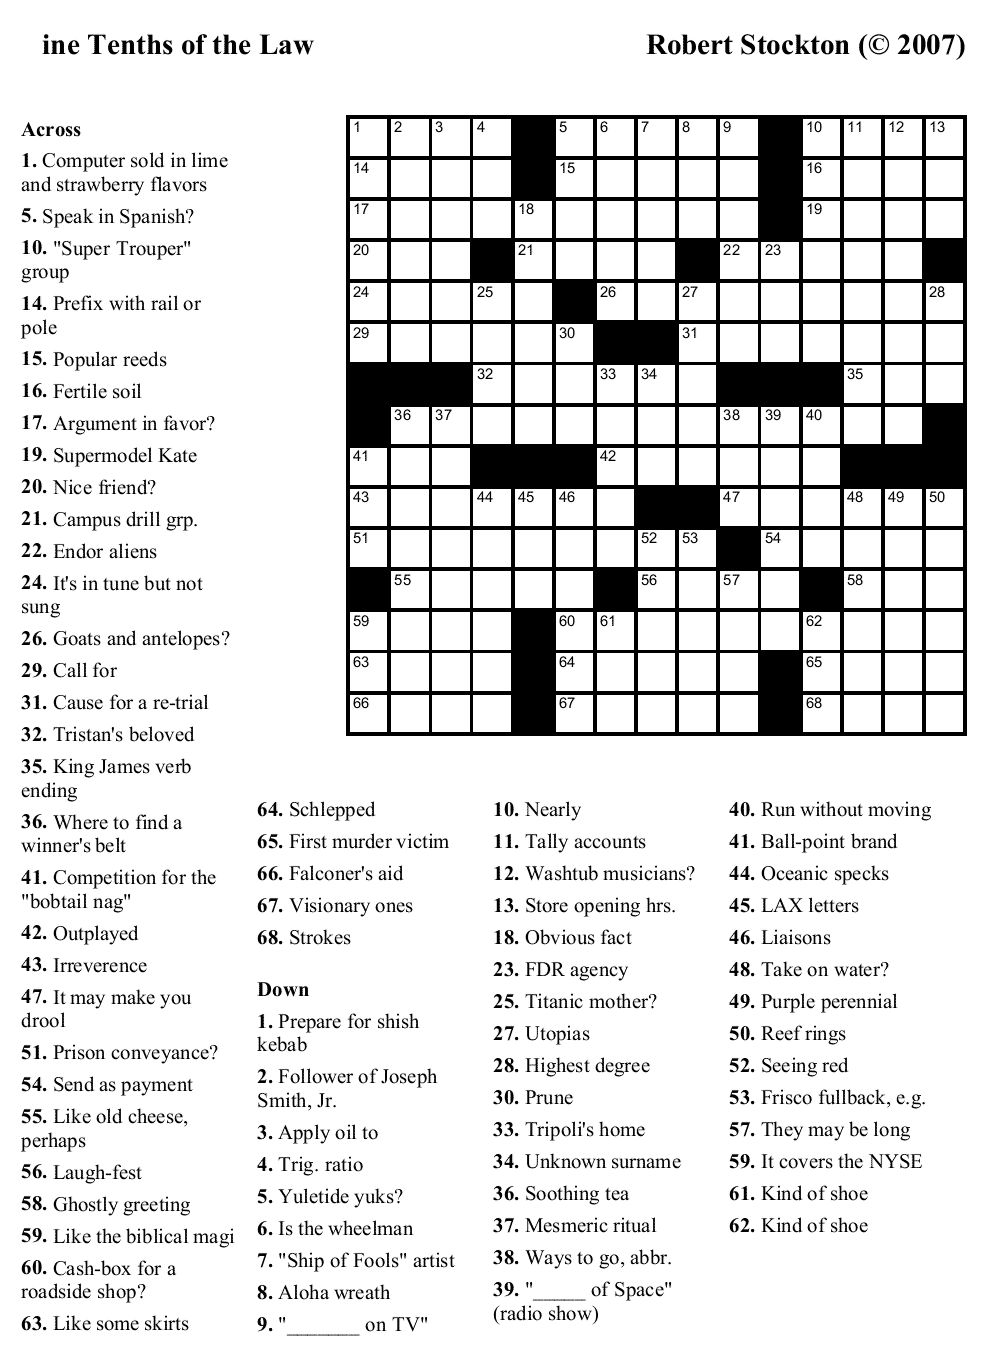 Crossword Puzzles Printable - Yahoo Image Search Results | Crossword - Sports Crossword Puzzles Printable